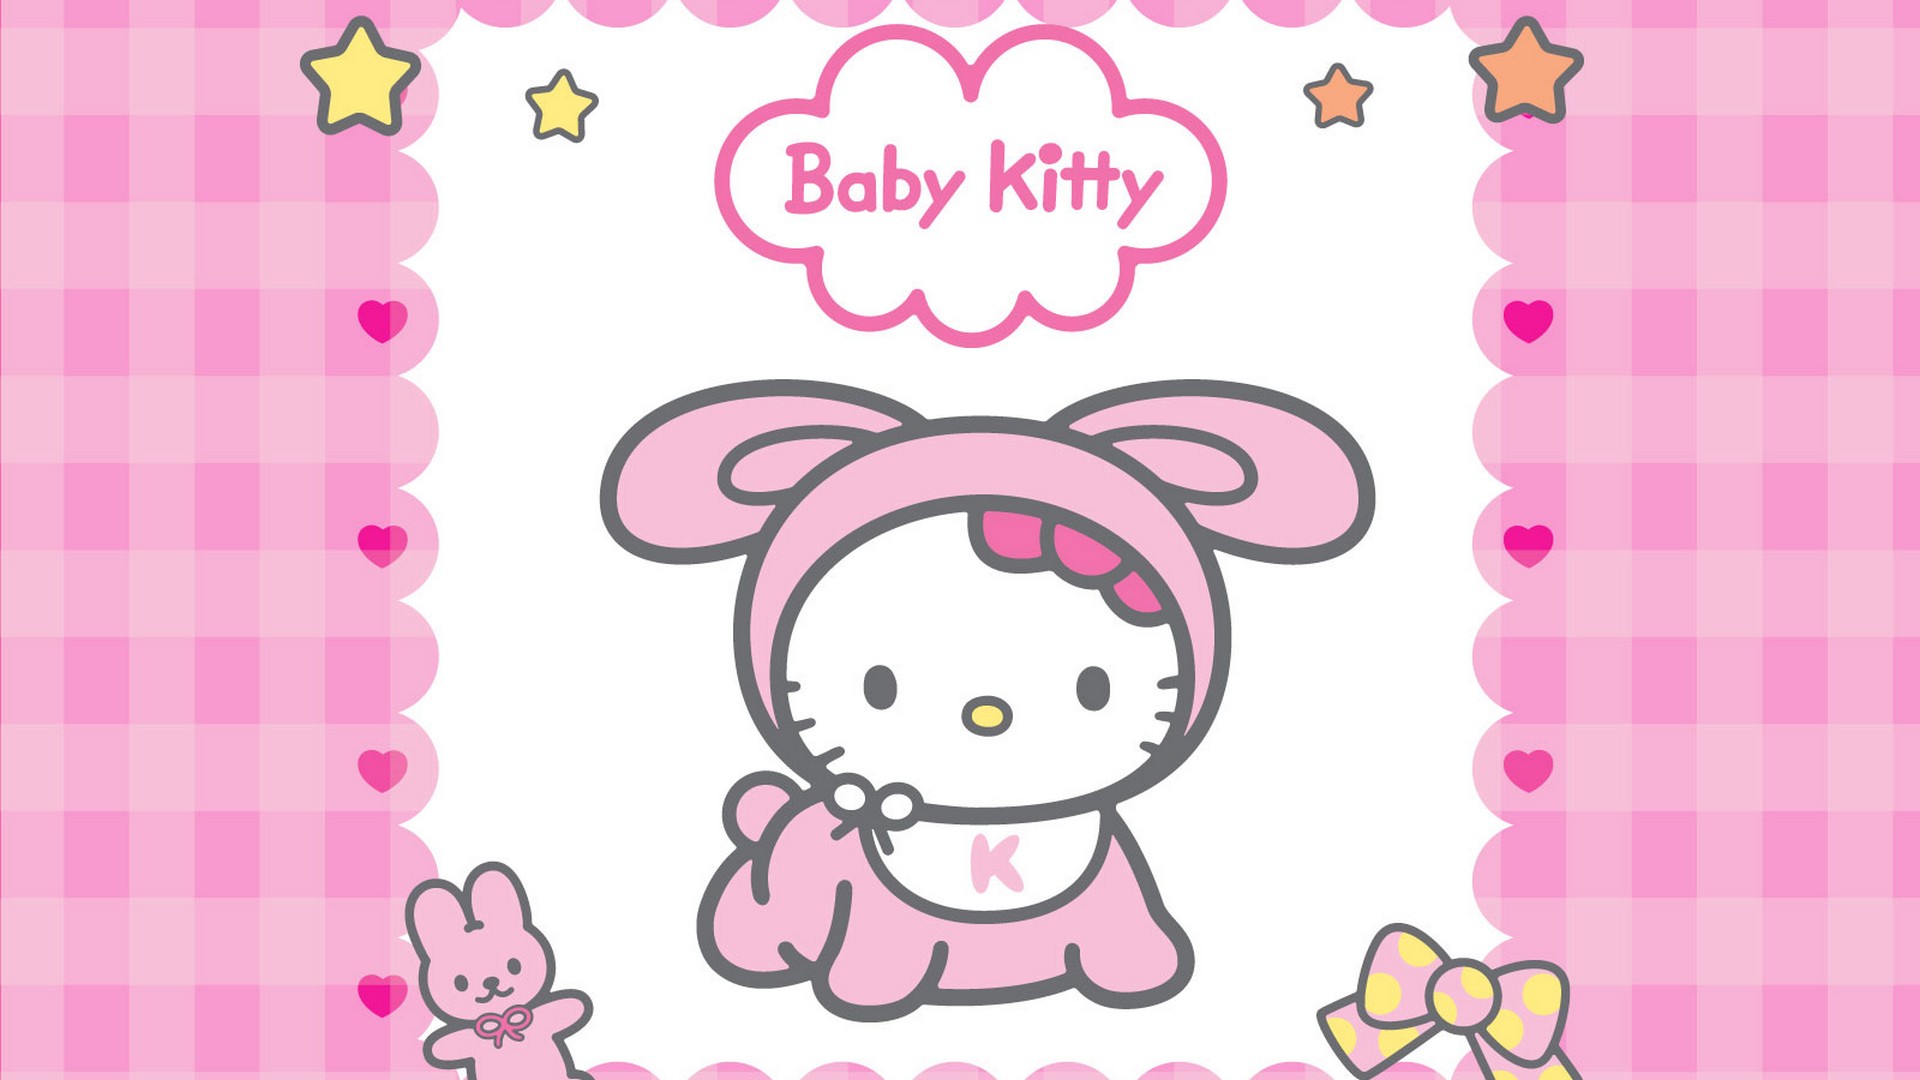 Hello Kitty Background Wallpaper HD with image resolution 1920x1080 pixel. You can make this wallpaper for your Desktop Computer Backgrounds, Mac Wallpapers, Android Lock screen or iPhone Screensavers